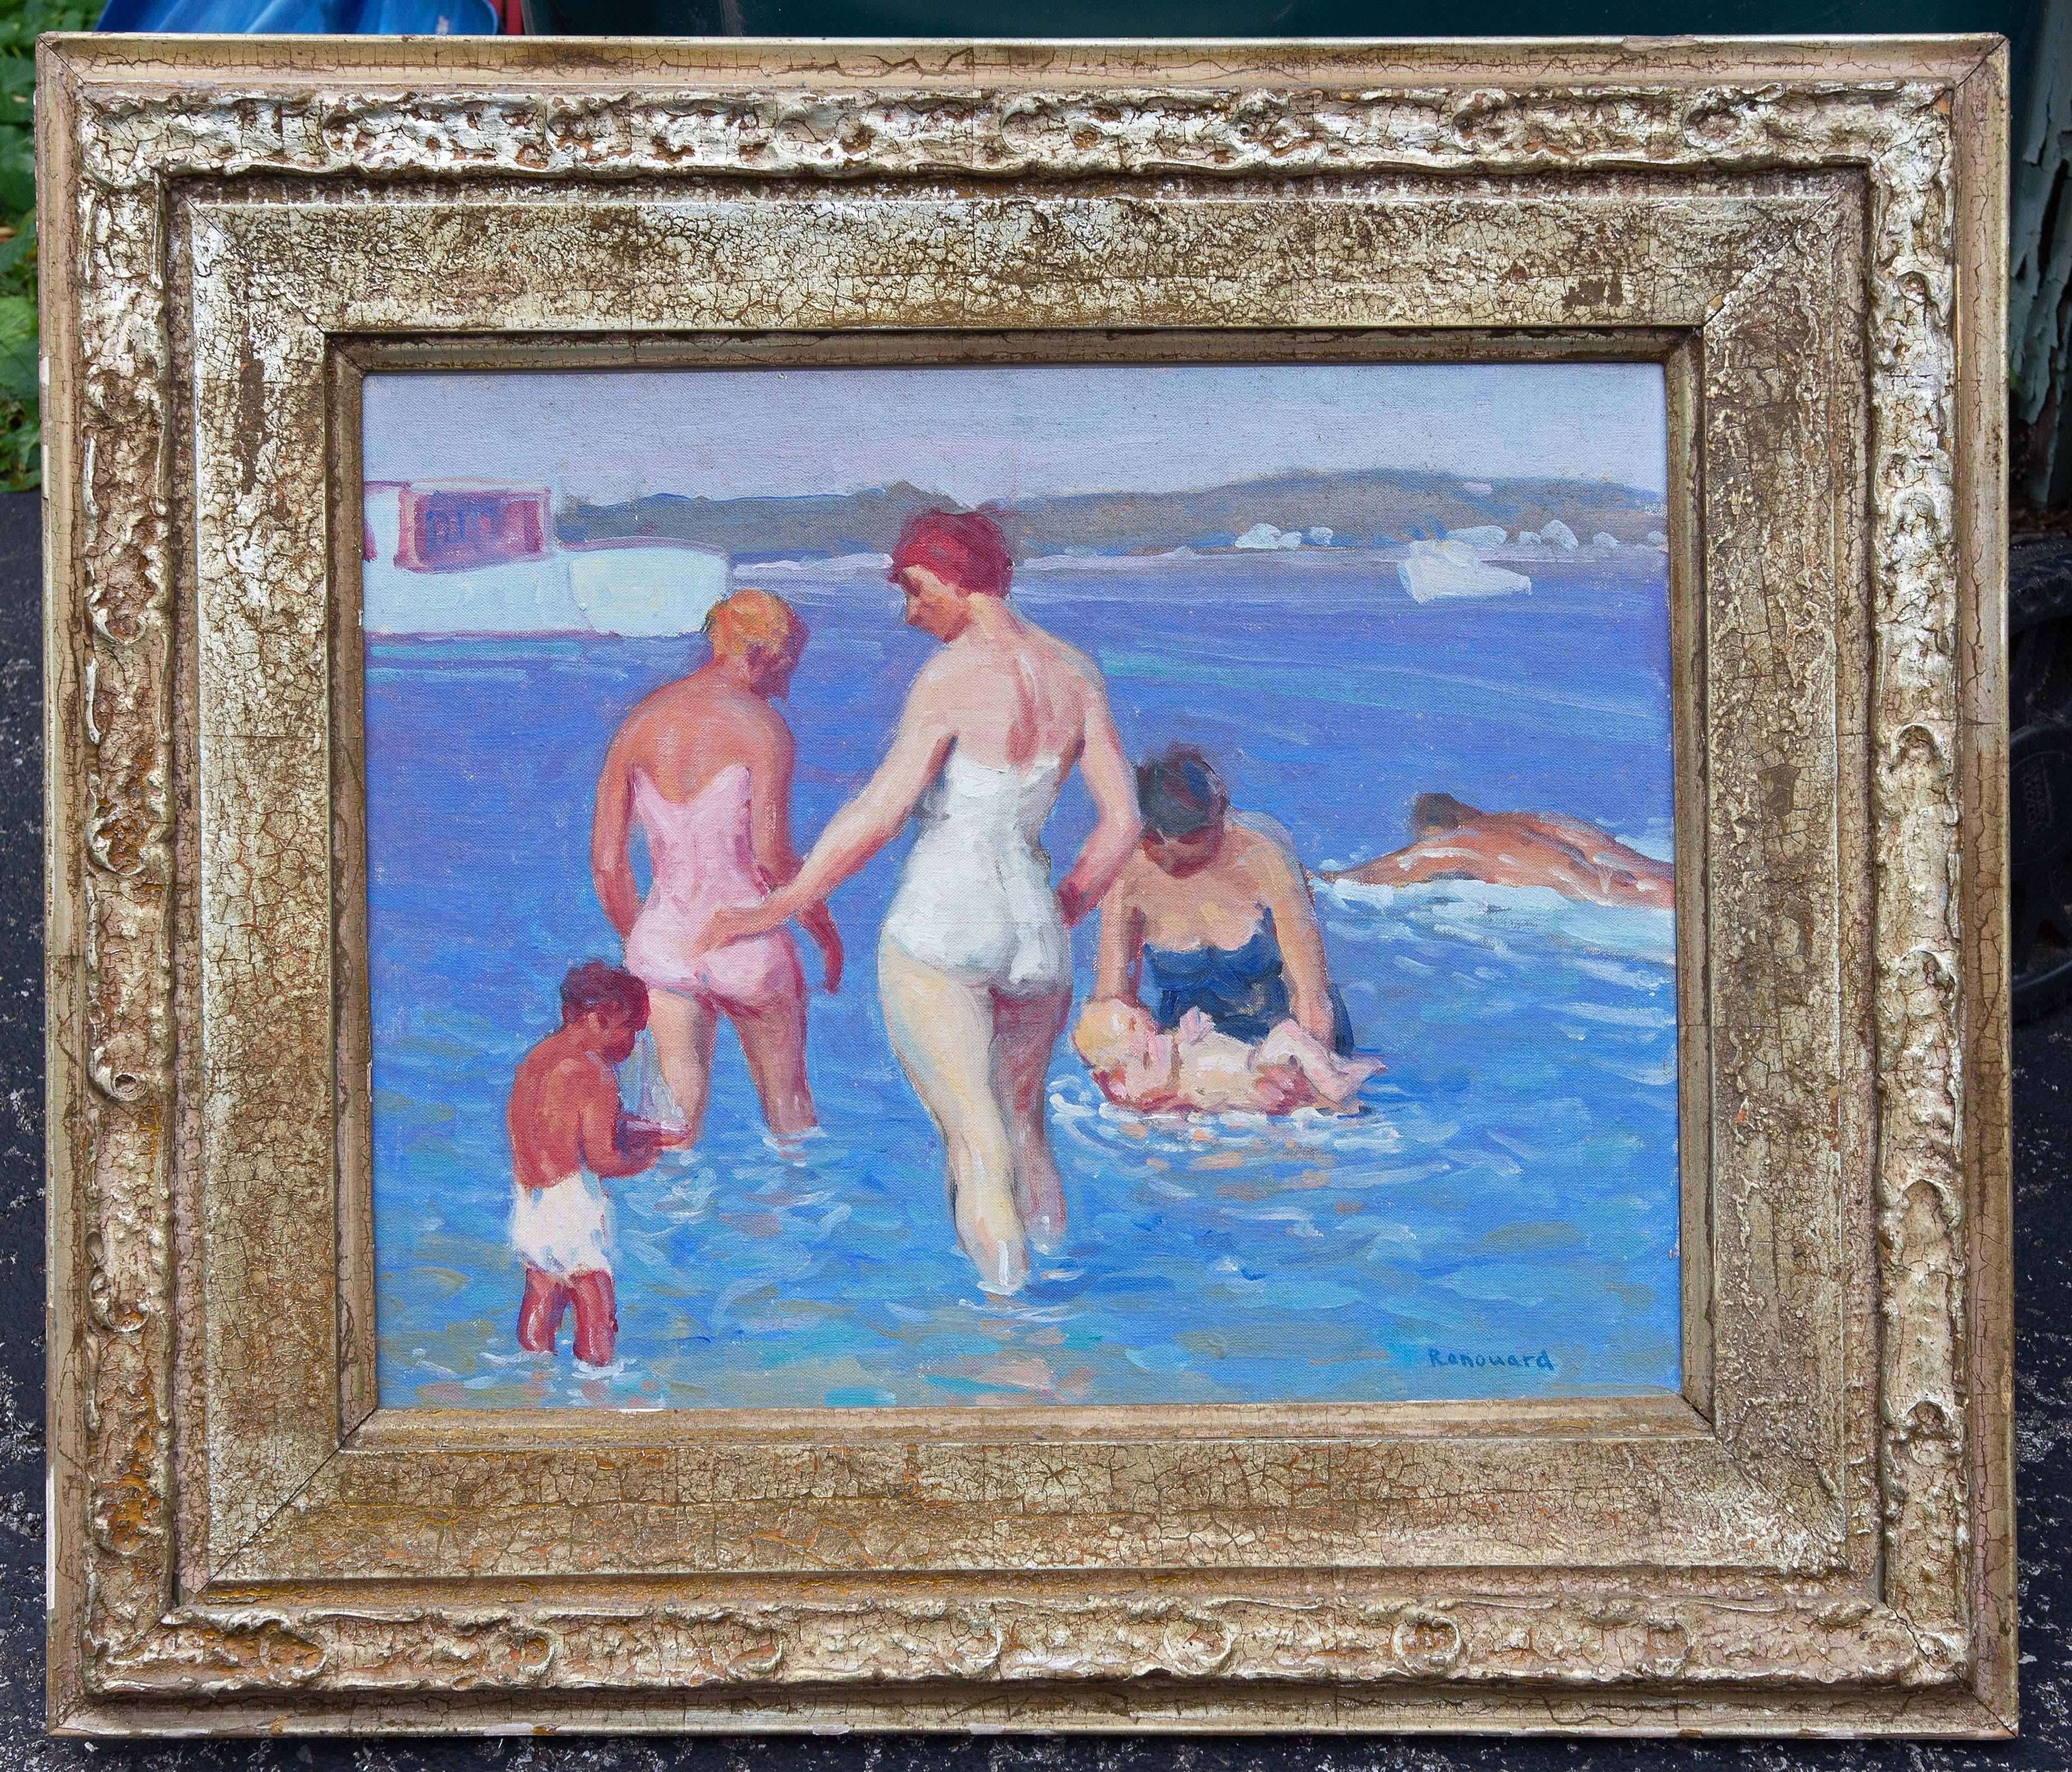 American impressionist beach scene by George Renouard. Painting depicts a family of bathers at the shore. The figures are three dimensional. The colors are both bold and soft. Figural paintings by Renouard are rare. This is the finest painting I